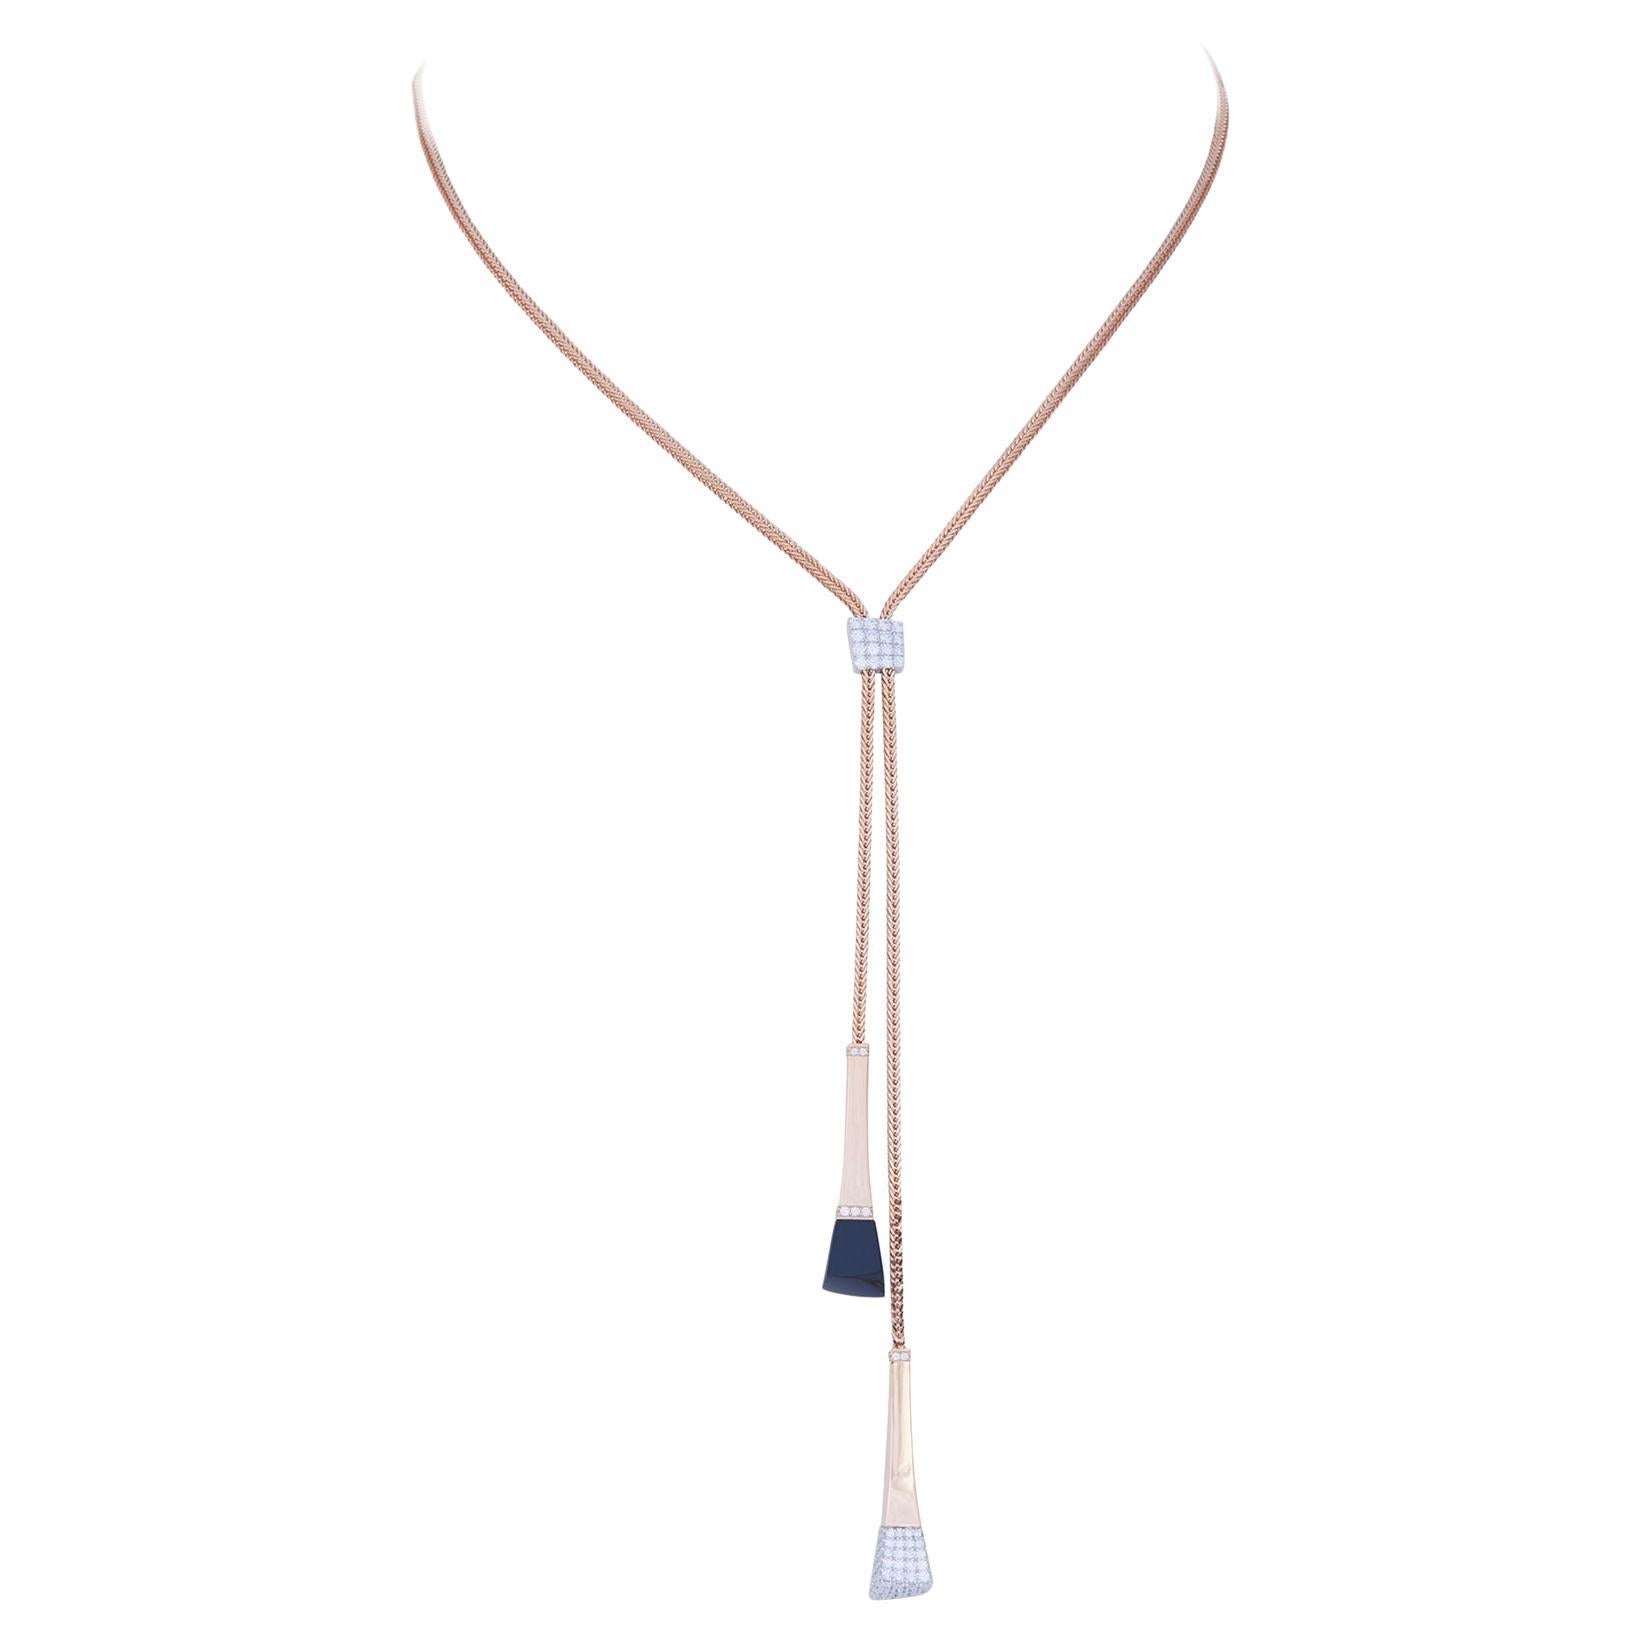 Roberto Coin 'Sauvage' Rose Gold Diamond and Onyx Necklace